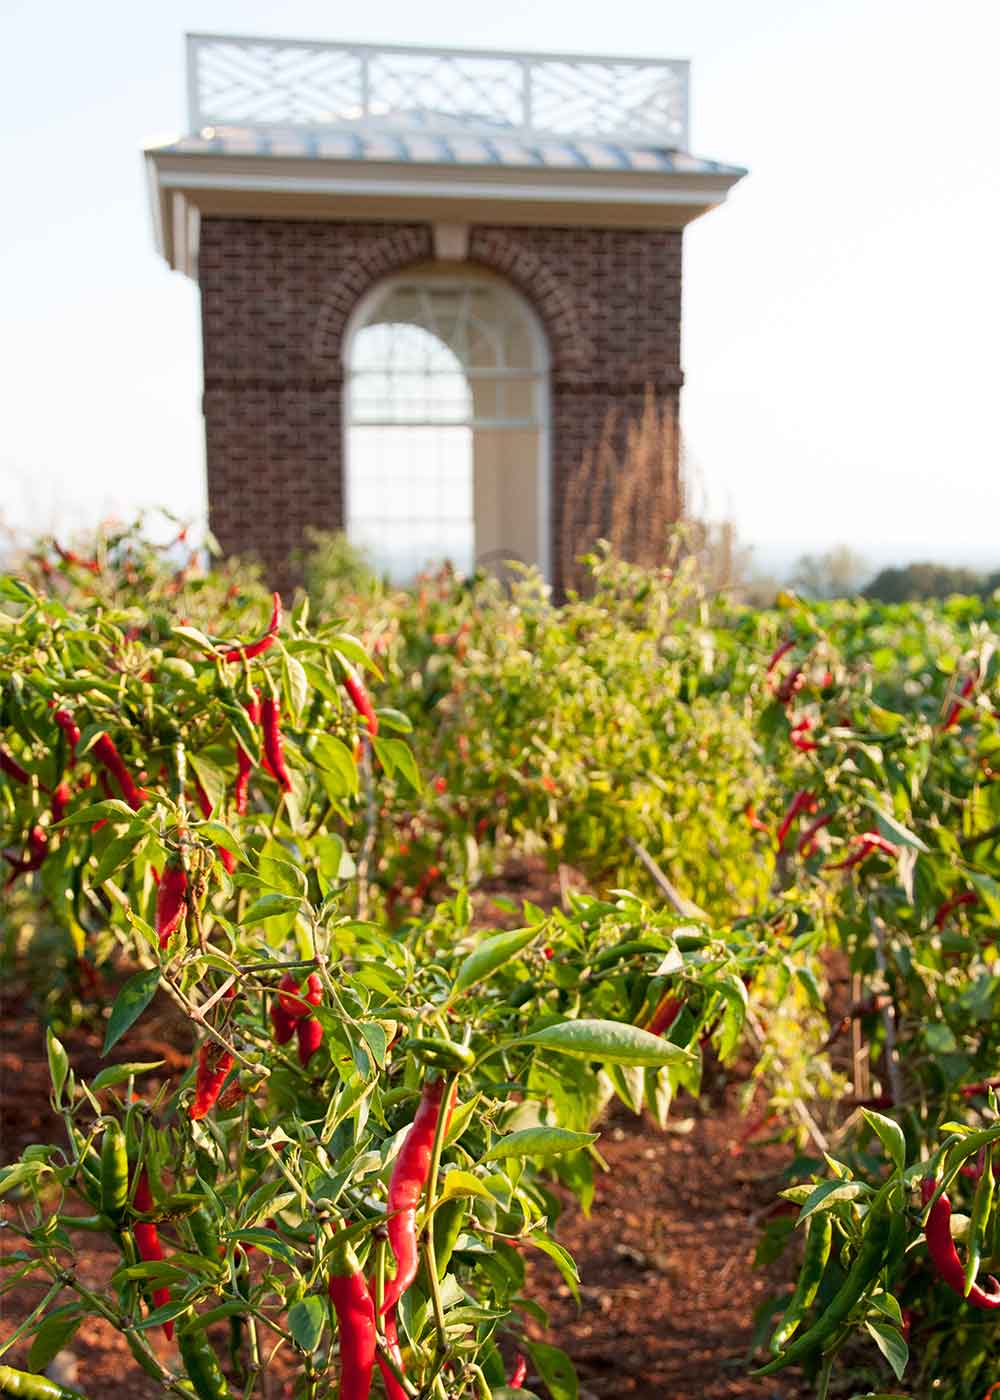 Jalapeno chili peppers in the Thomas Jefferson gardens at Monticello in Charlottesville, Virginia.